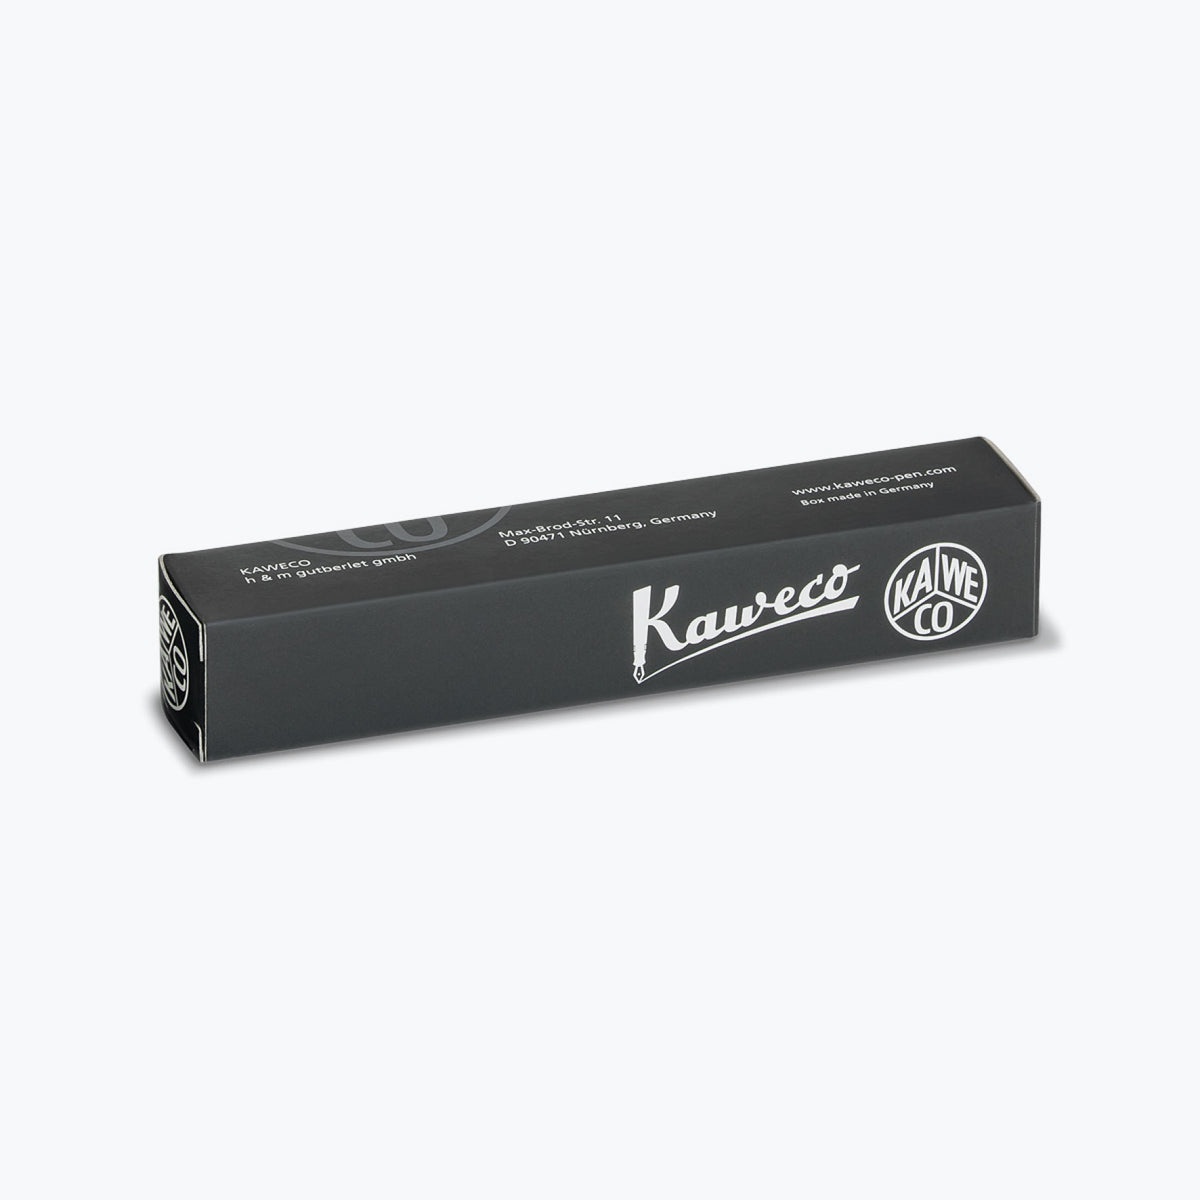 Kaweco - Ballpoint Pen - Classic Sport - Red <Outgoing>